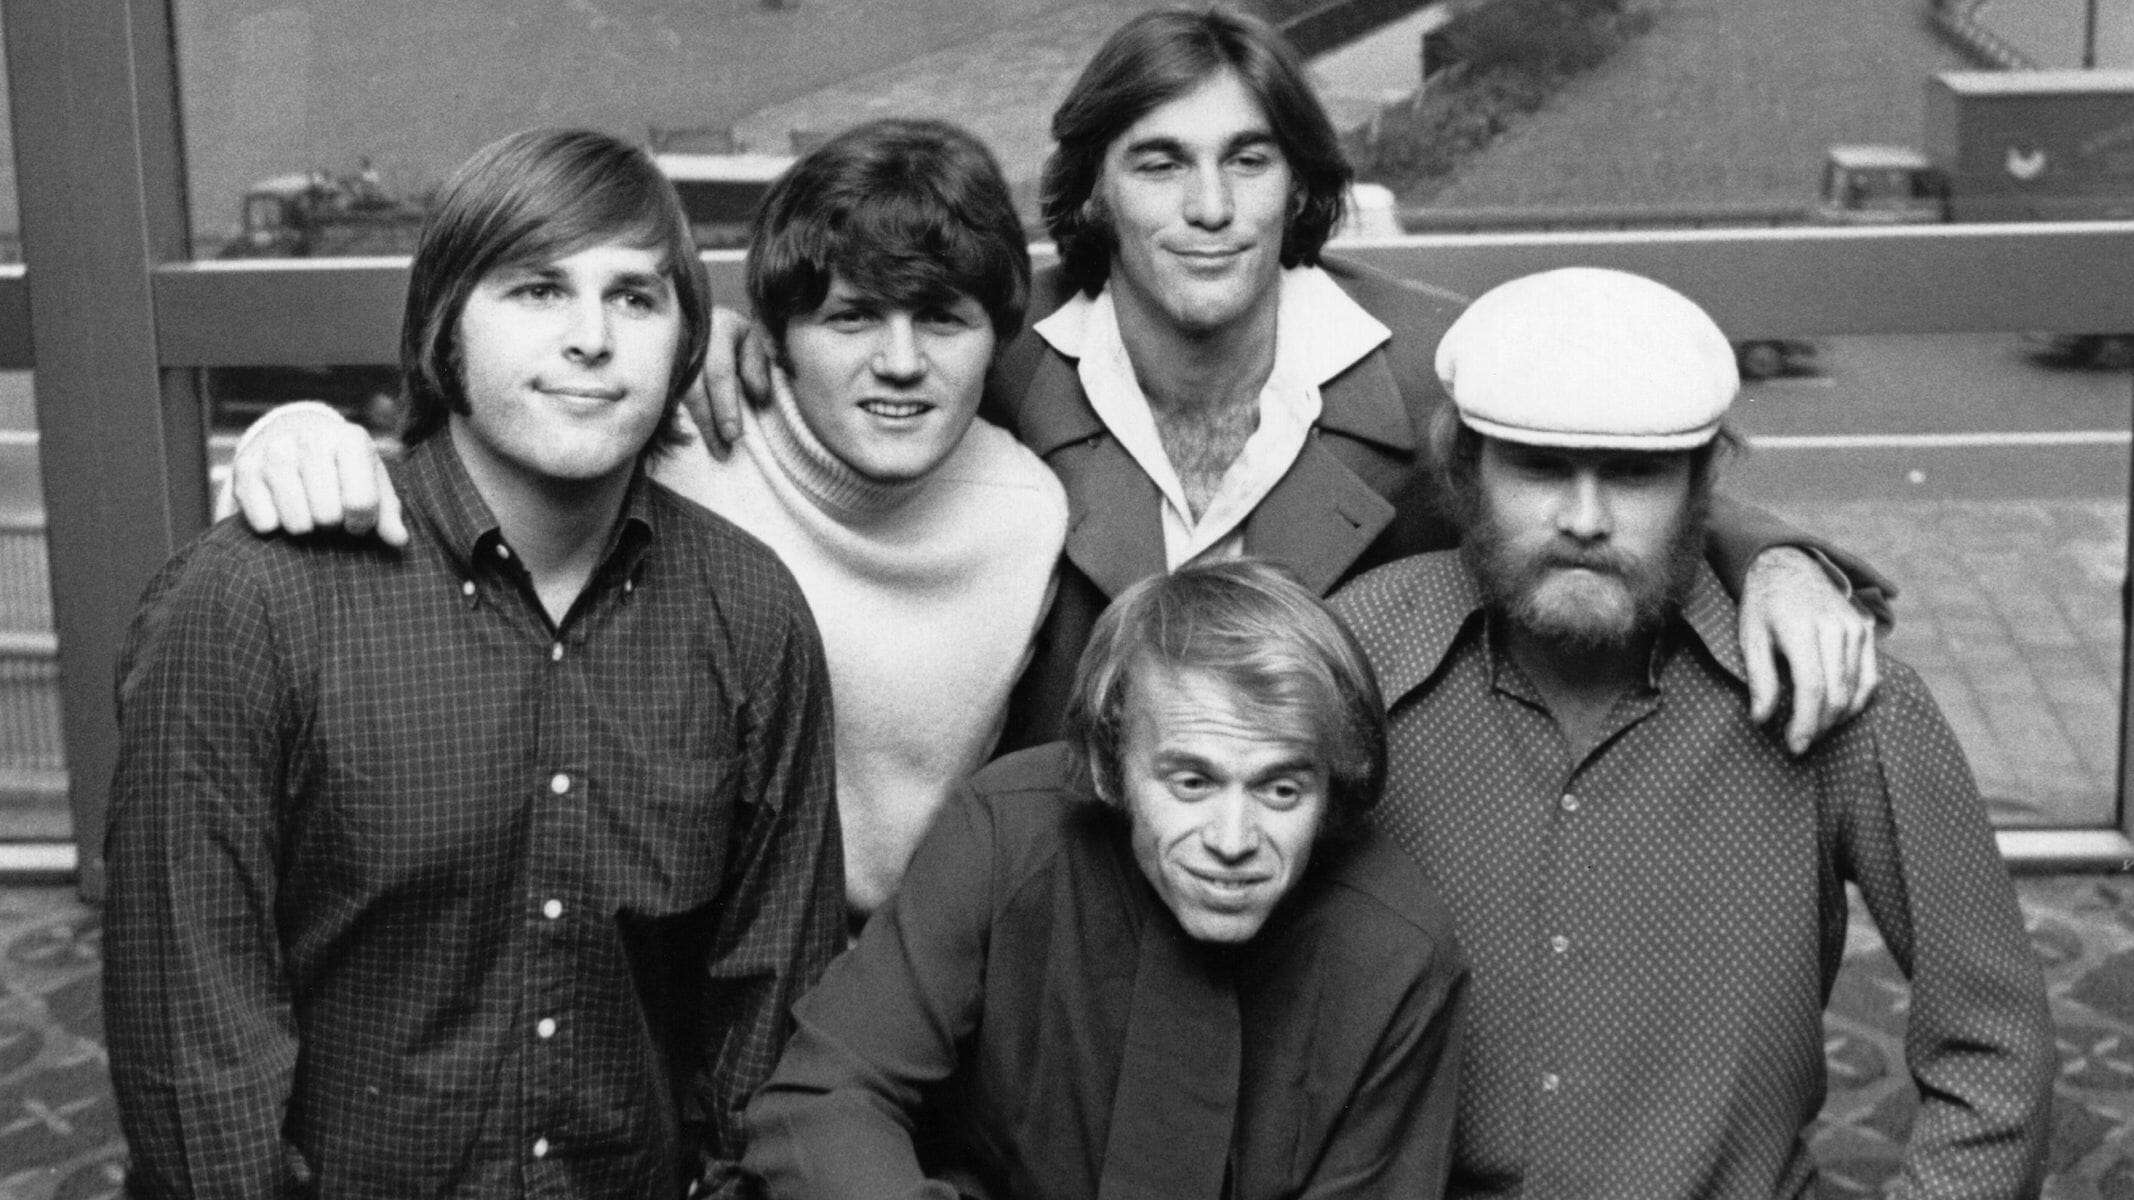 Hear The 5 Original Beach Boys Present Their Surf Hits on This Day in 1979